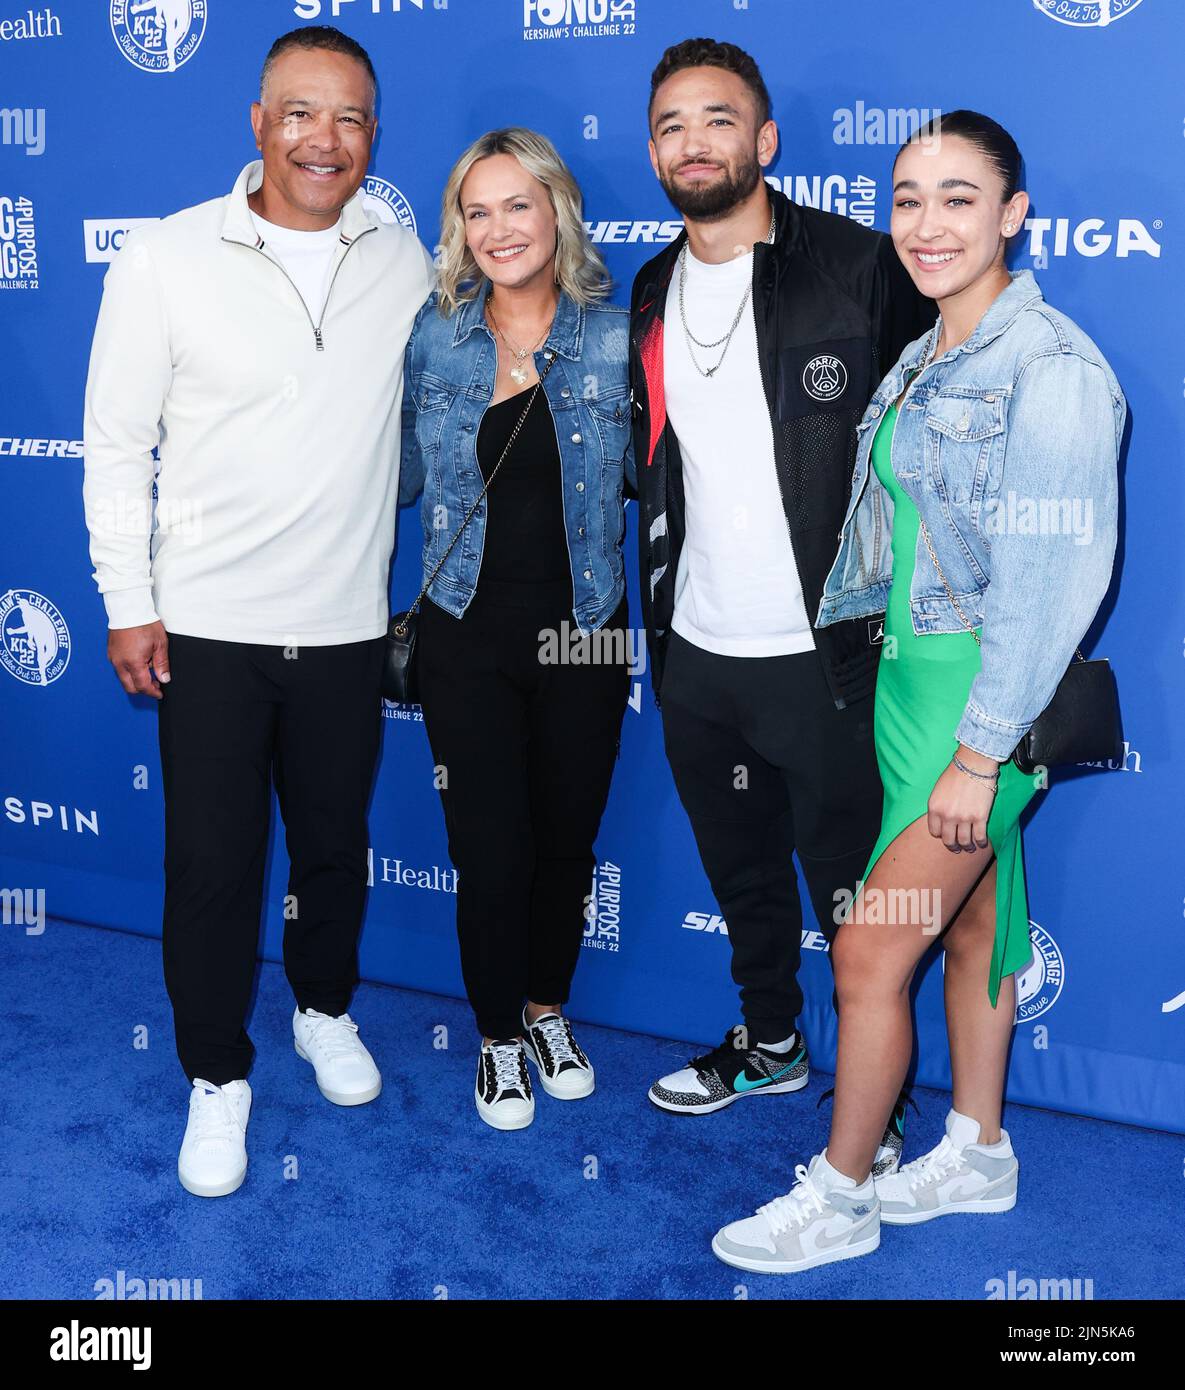 ELYSIAN PARK, LOS ANGELES, CALIFORNIA, USA - AUGUST 08: American professional baseball manager and former outfielder who is the manager of the Los Angeles Dodgers of Major League Baseball Dave Roberts, wife Tricia Roberts, son Cole Roberts and daughter Emmerson Roberts arrive at Kershaw's Challenge Ping Pong 4 Purpose 2022 held at Dodger Stadium on August 8, 2022 in Elysian Park, Los Angeles, California, United States. (Photo by Xavier Collin/Image Press Agency) Stock Photo